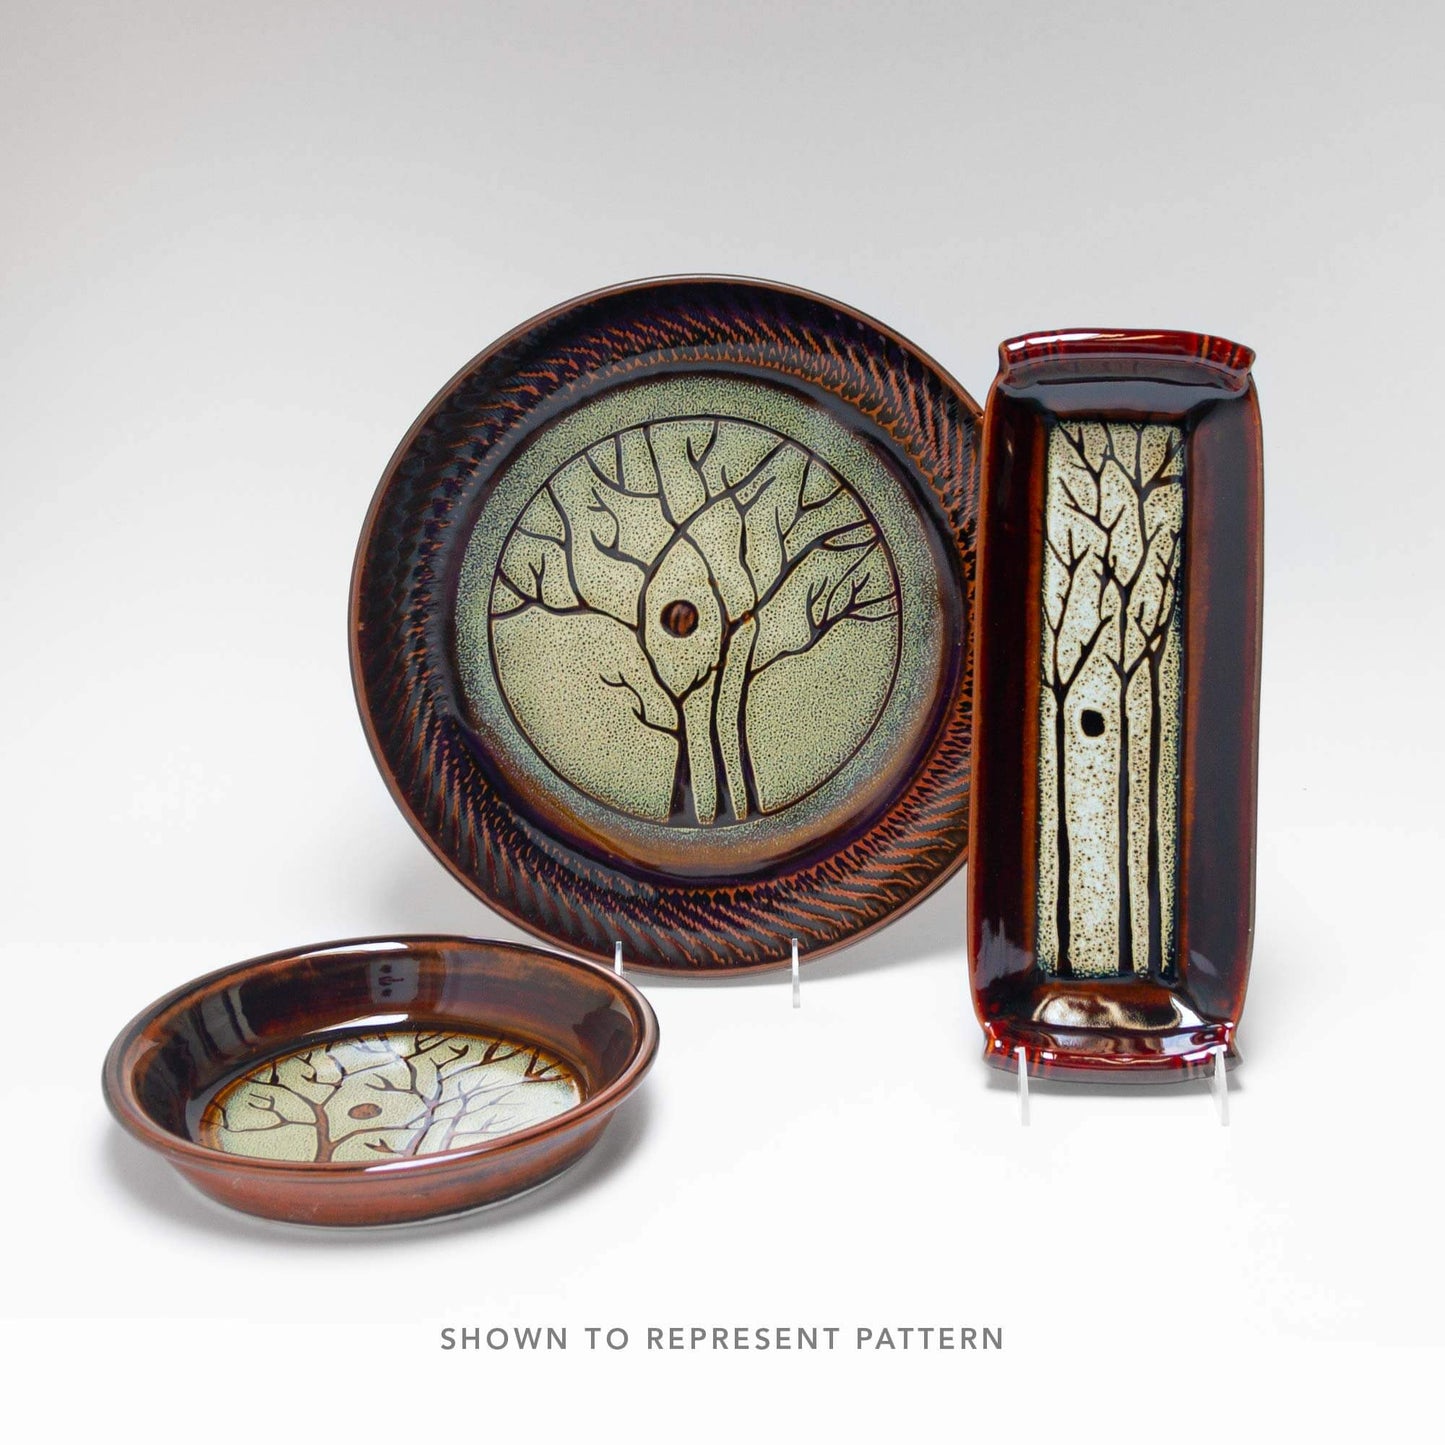 Handmade Pottery Appetizer Bowl in Hamada Tree pattern made by Georgetown Pottery in Maine